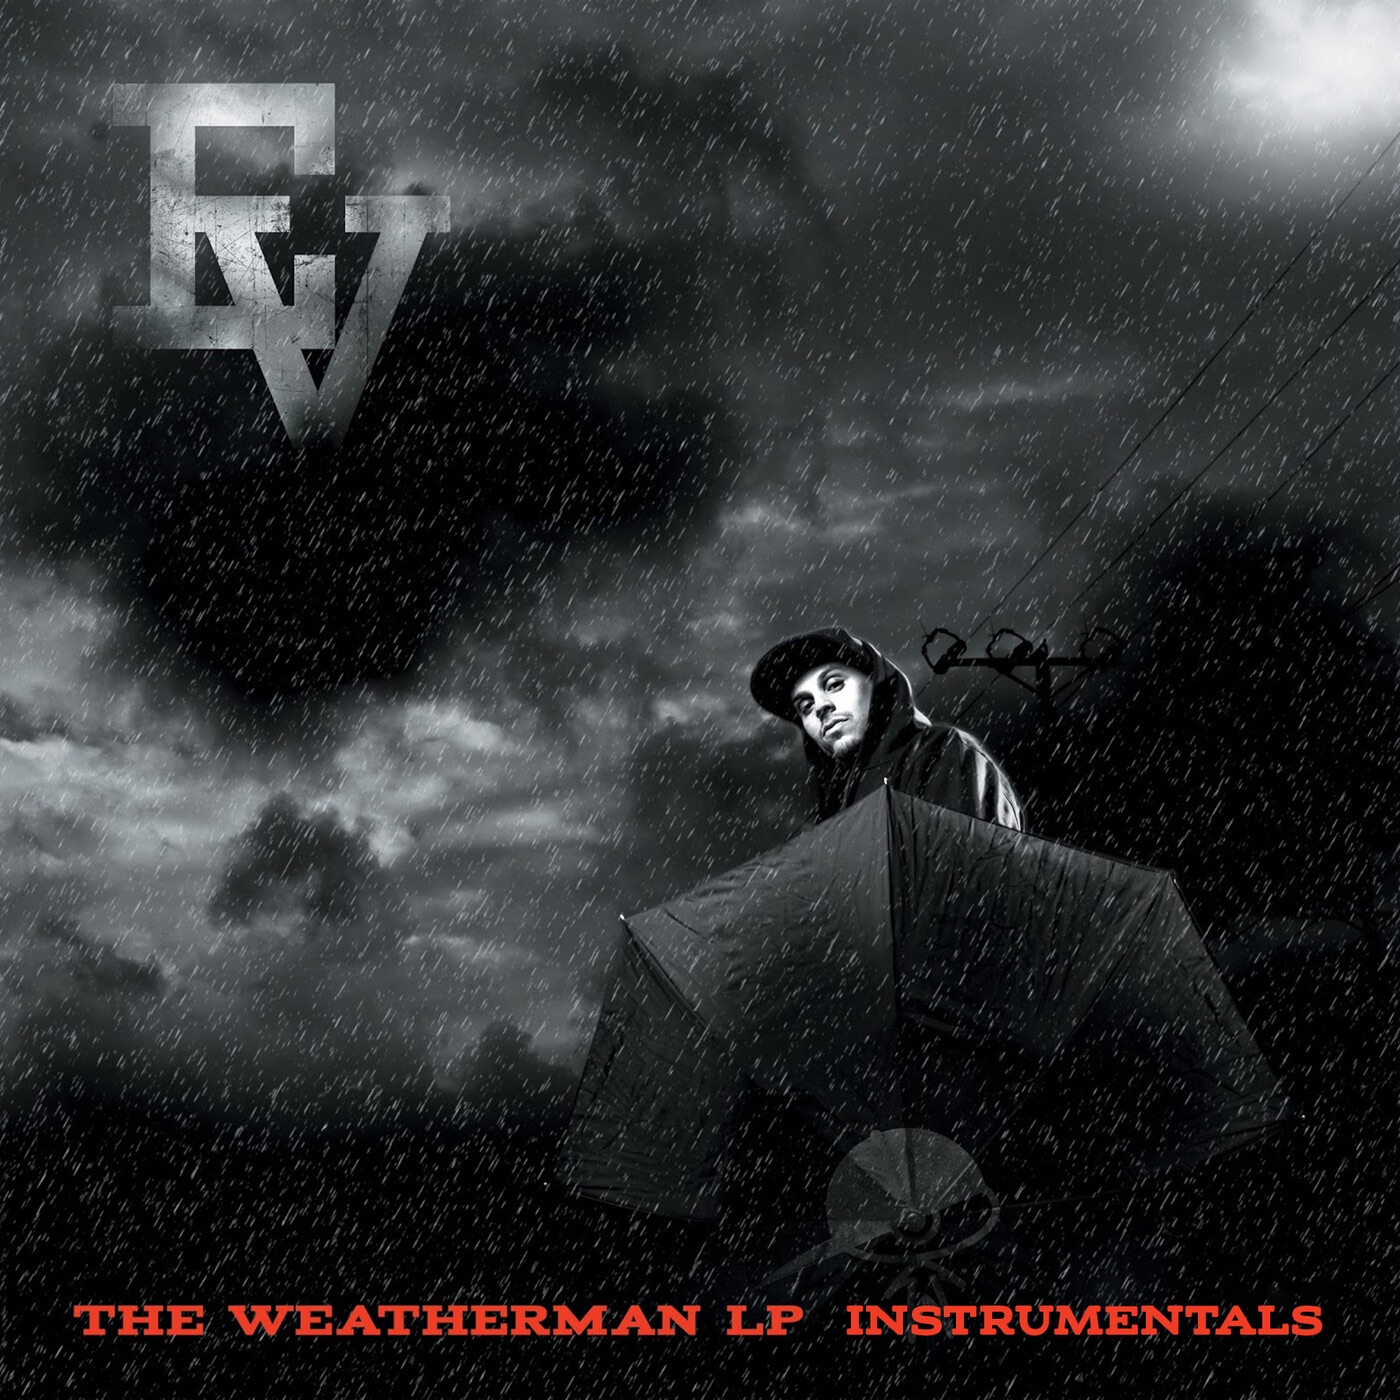 The Weatherman LP by Evidence, The Weatherman LP